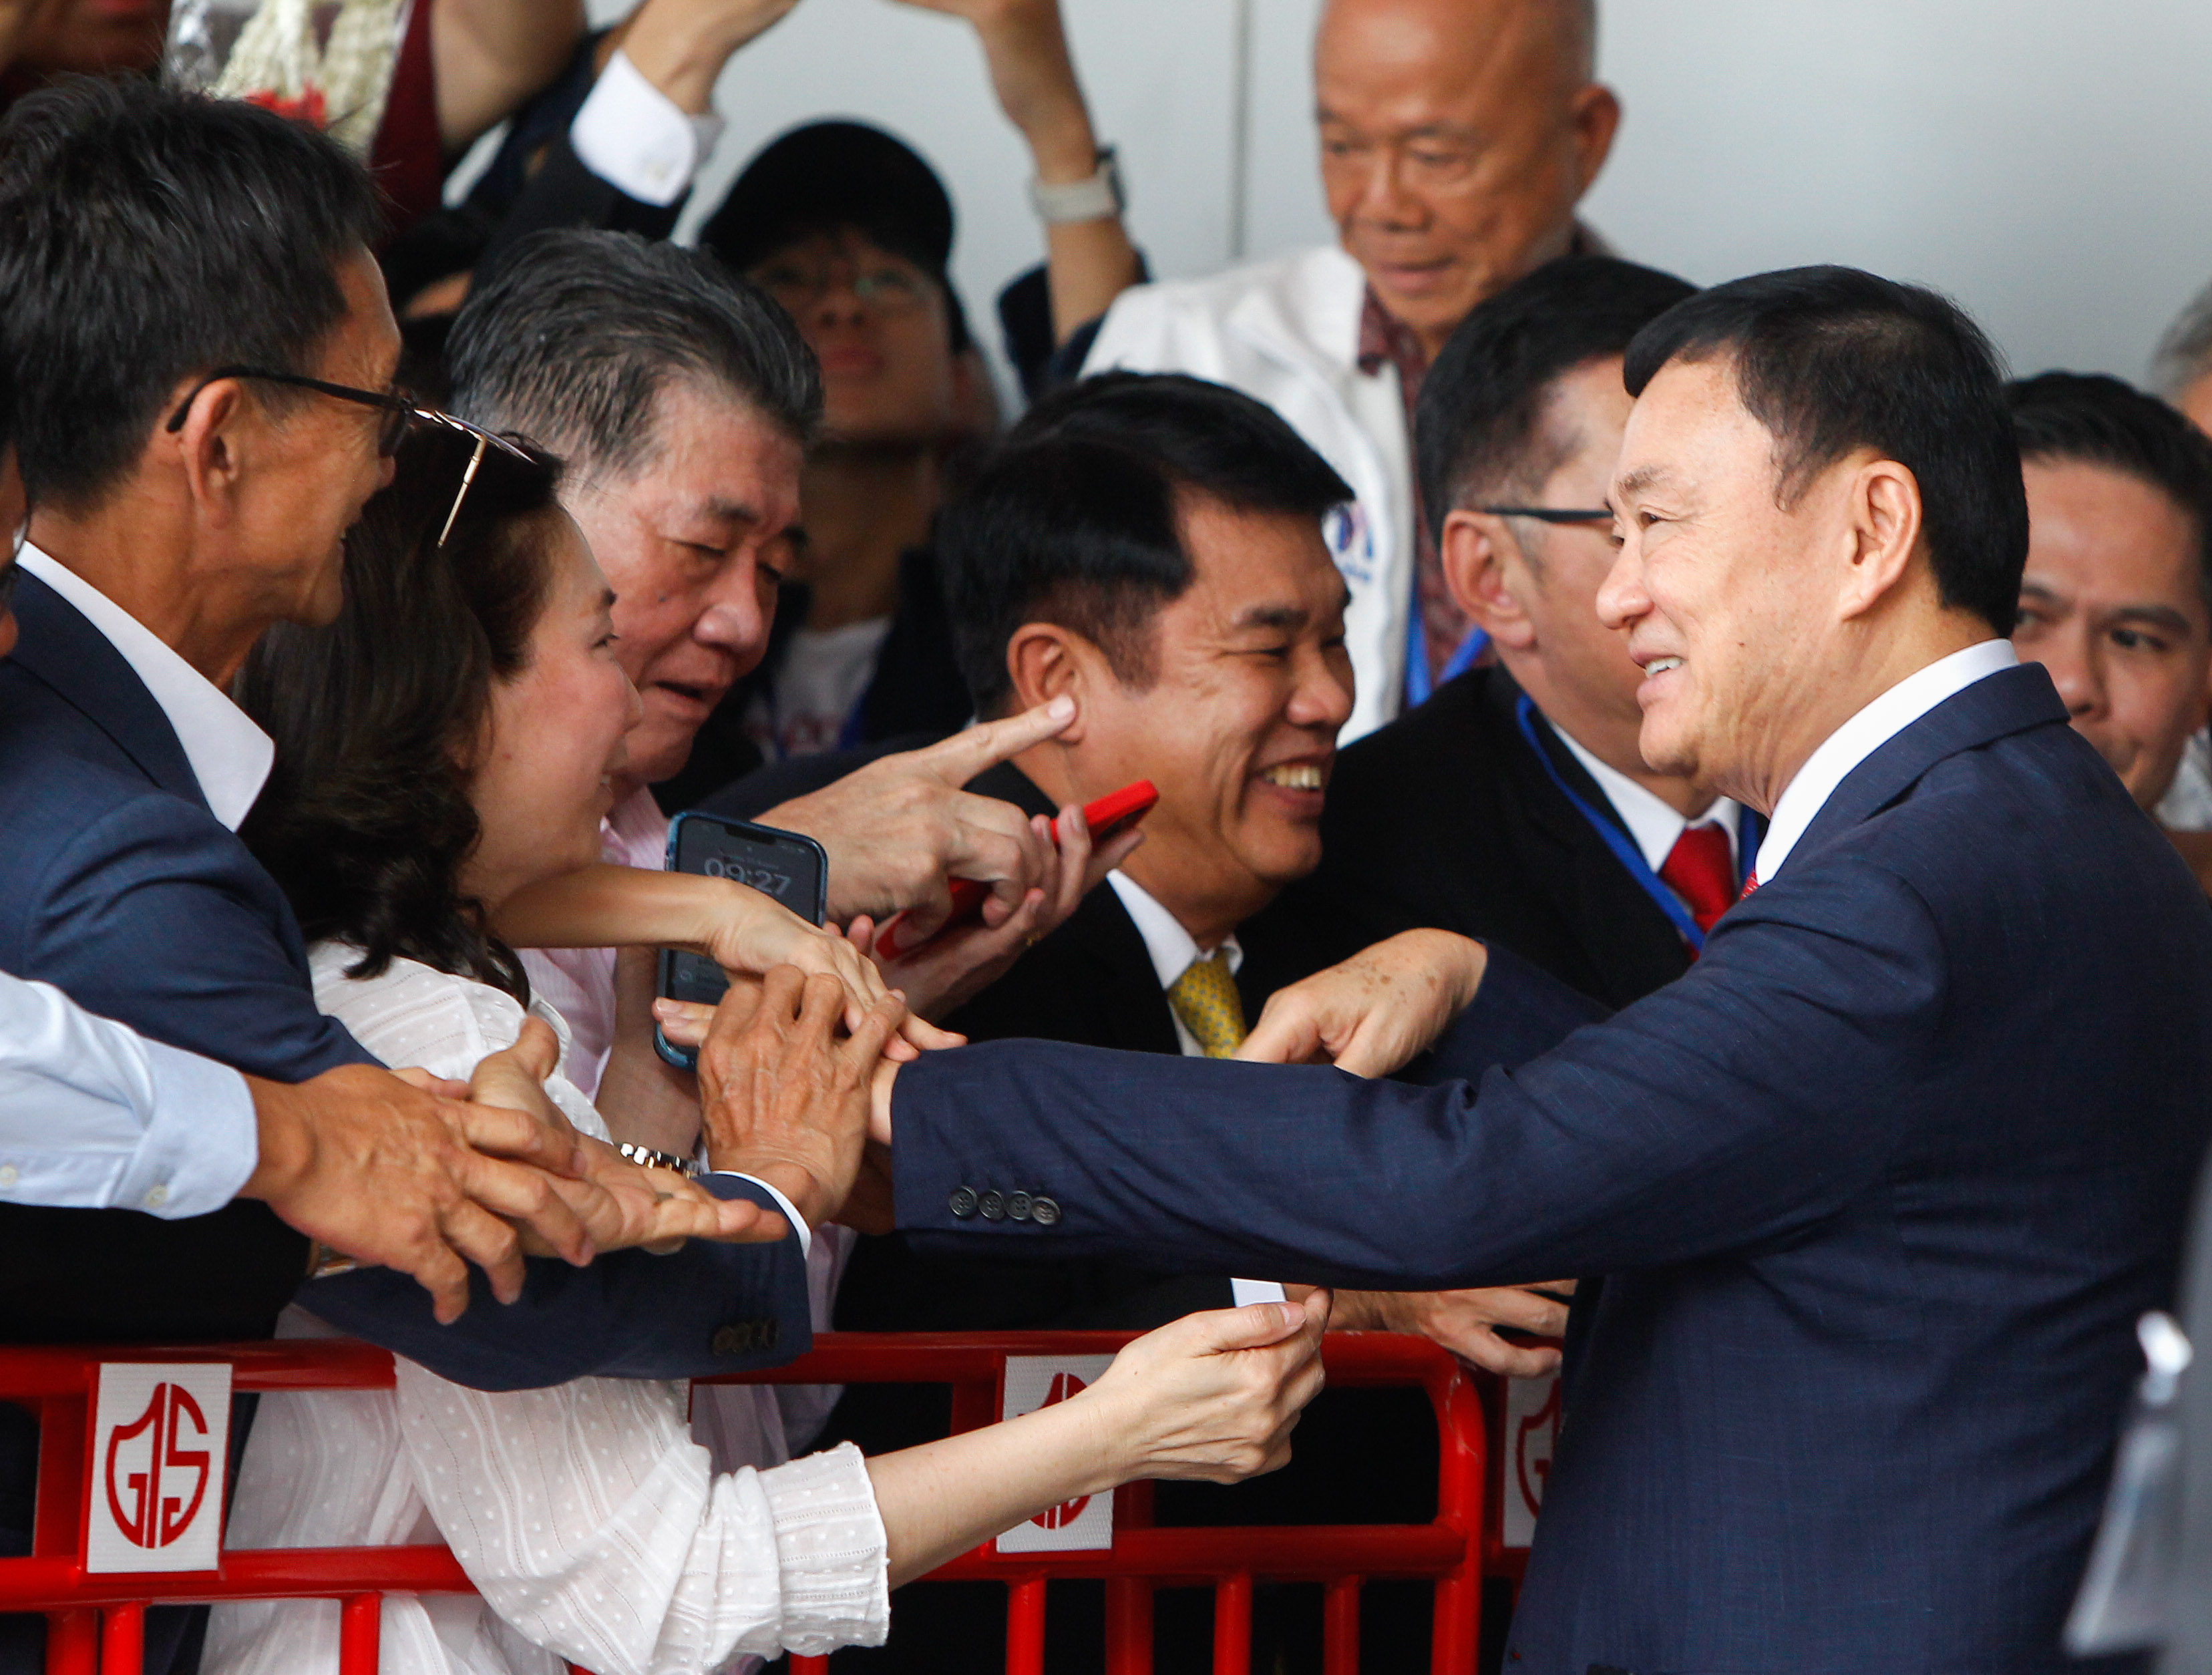 Former Thai prime minister Thaksin Shinawatra greets his supporters as he arrives at Don Mueang airport on Tuesday. Photo: Zuma Press Wire/dpa